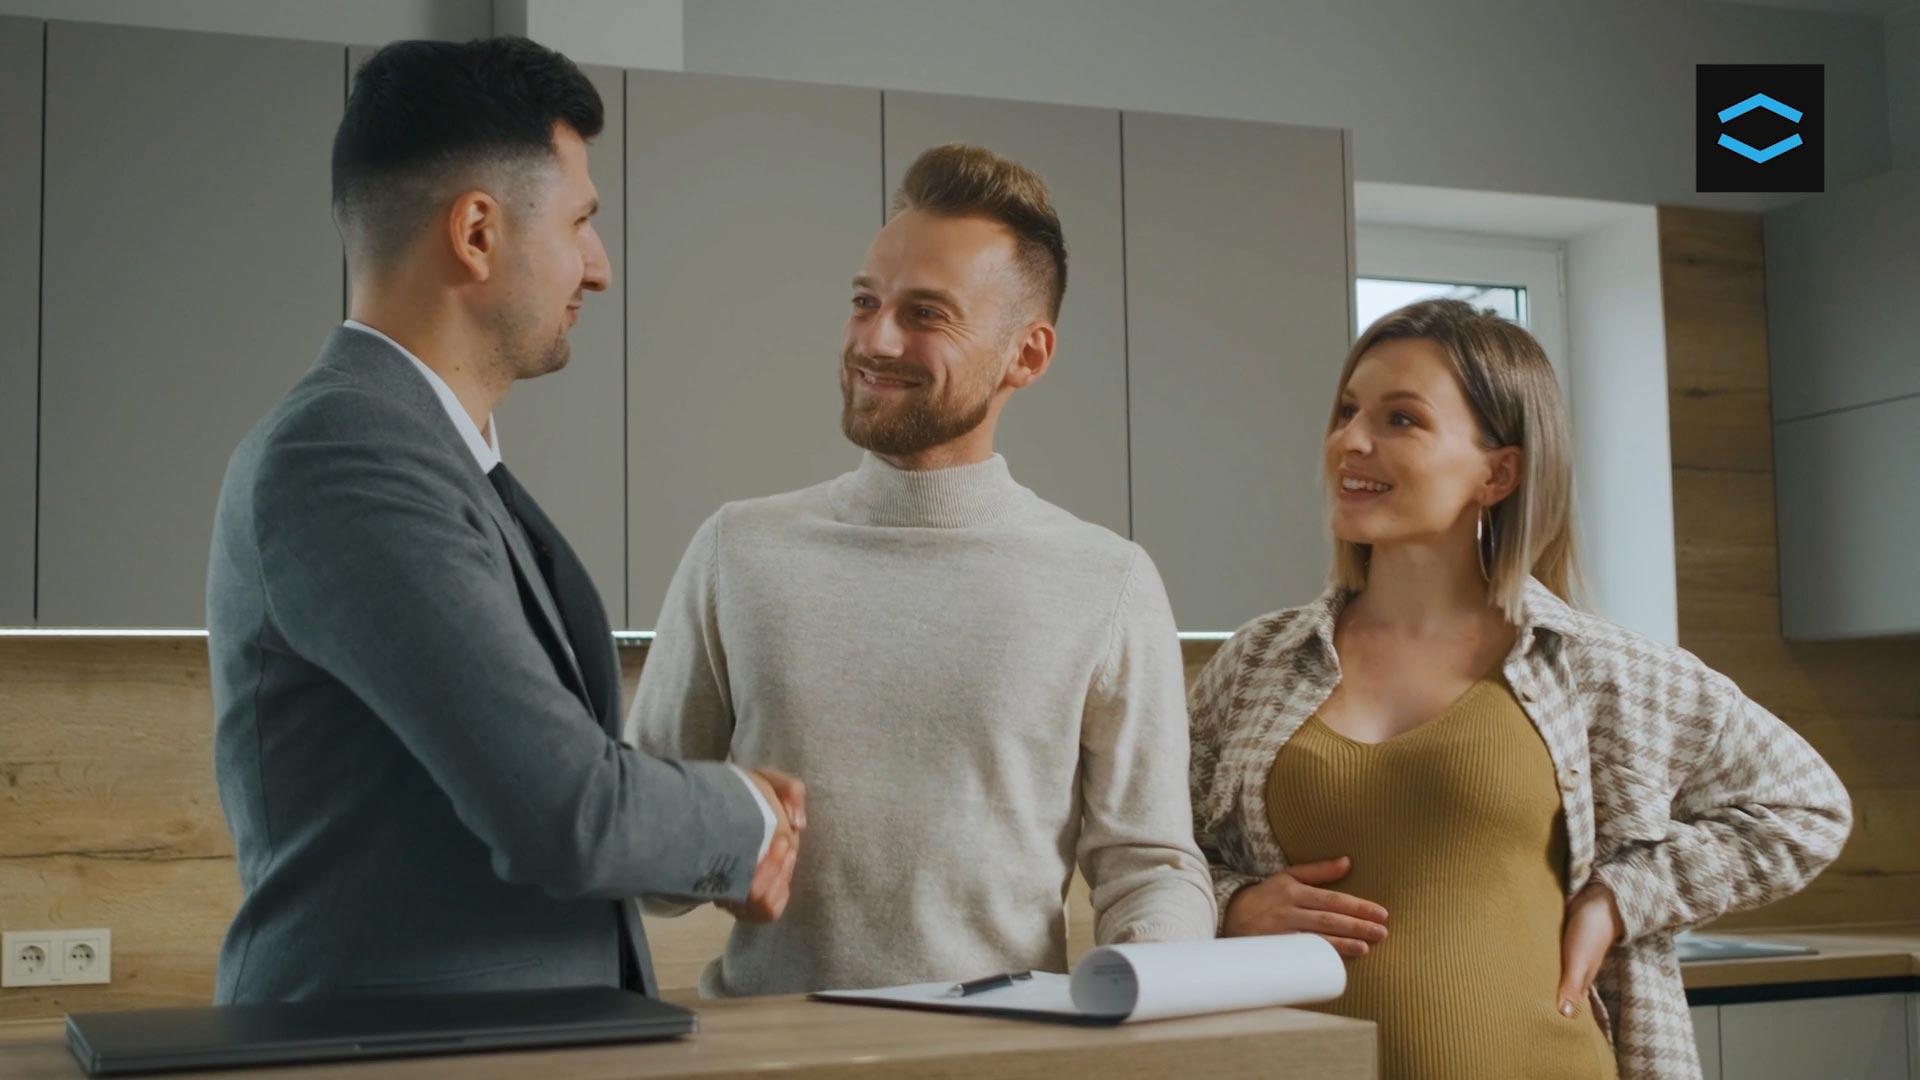 A couple thanking a mortgage broker for helping them find their dream home